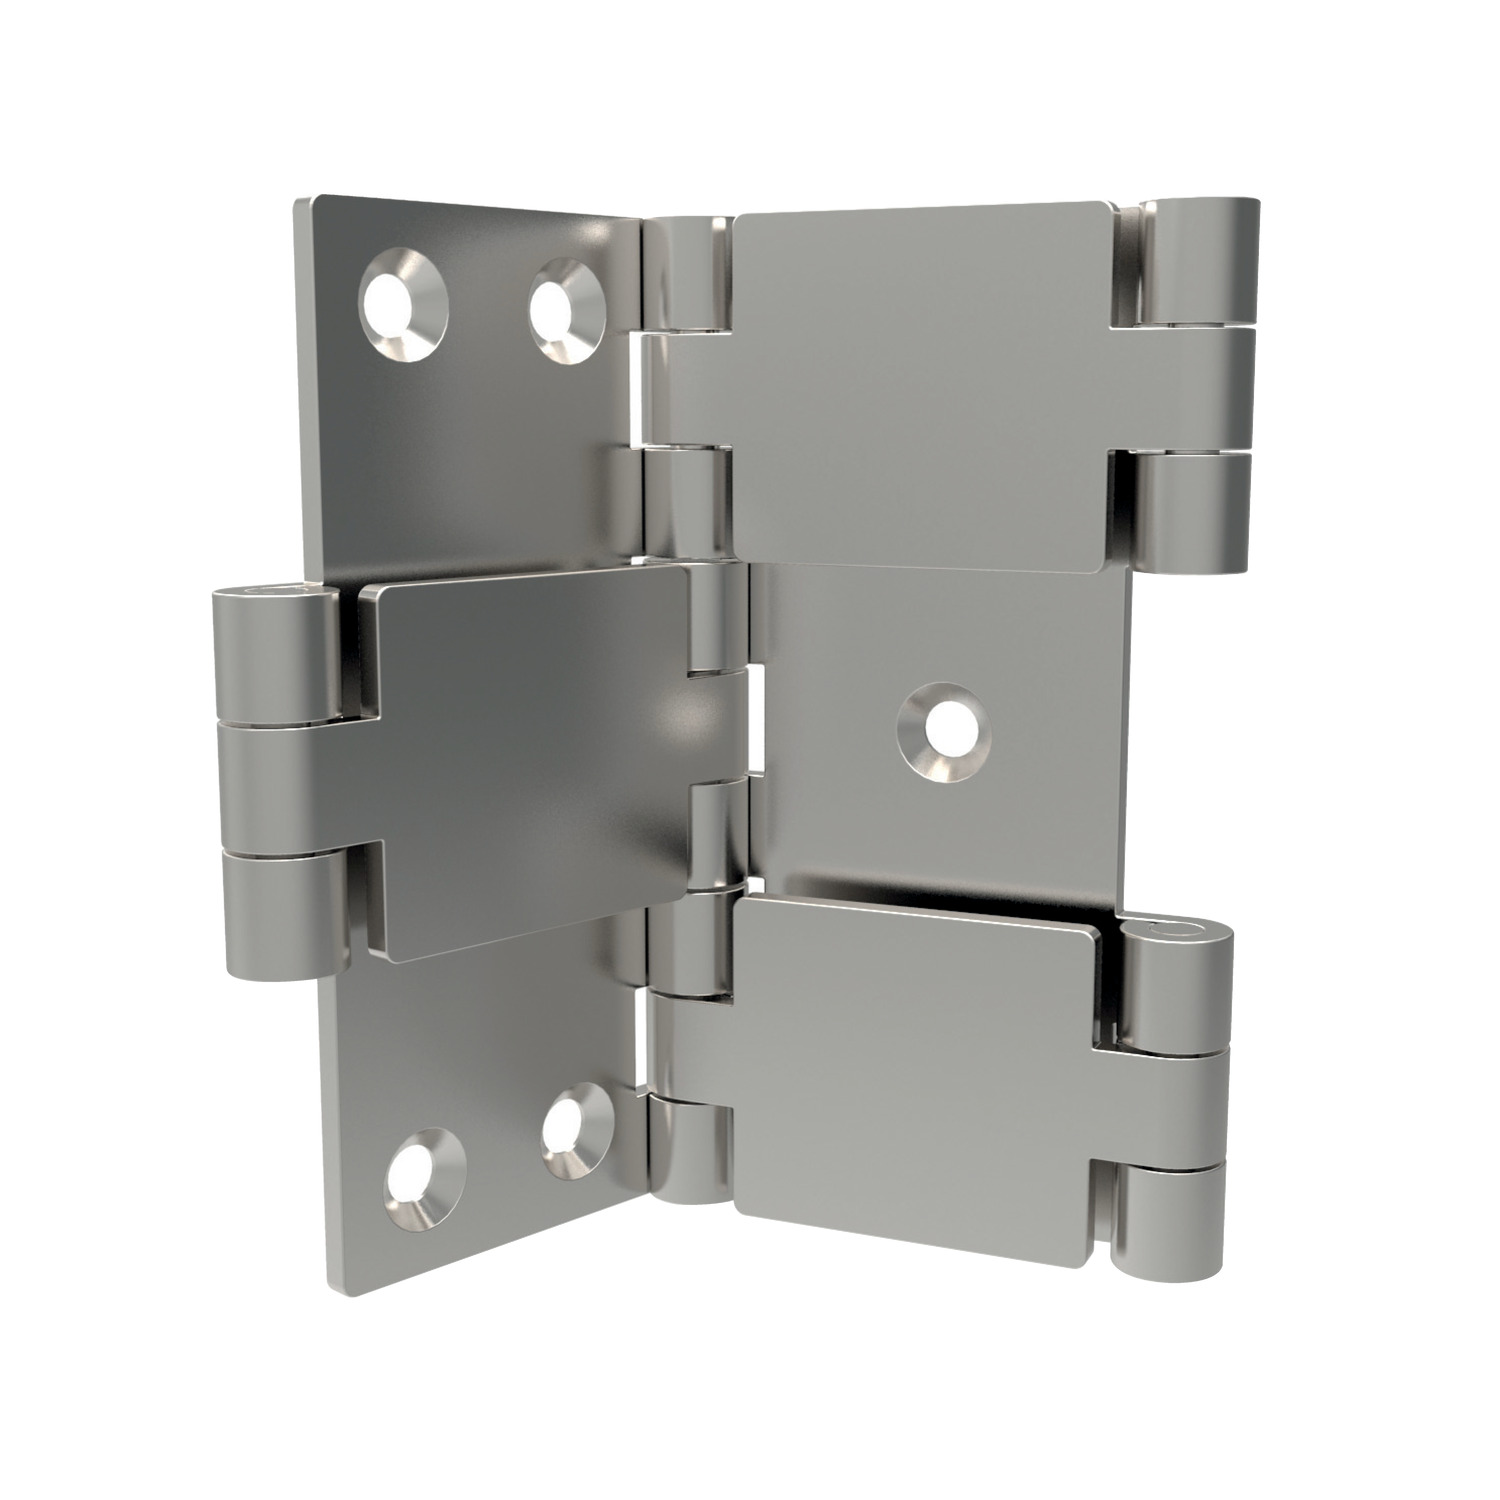 Surface Mount - Double Pivot Universal left and ring swing of 180°. Made from Stainless steel (AISI 304) with satin finish.